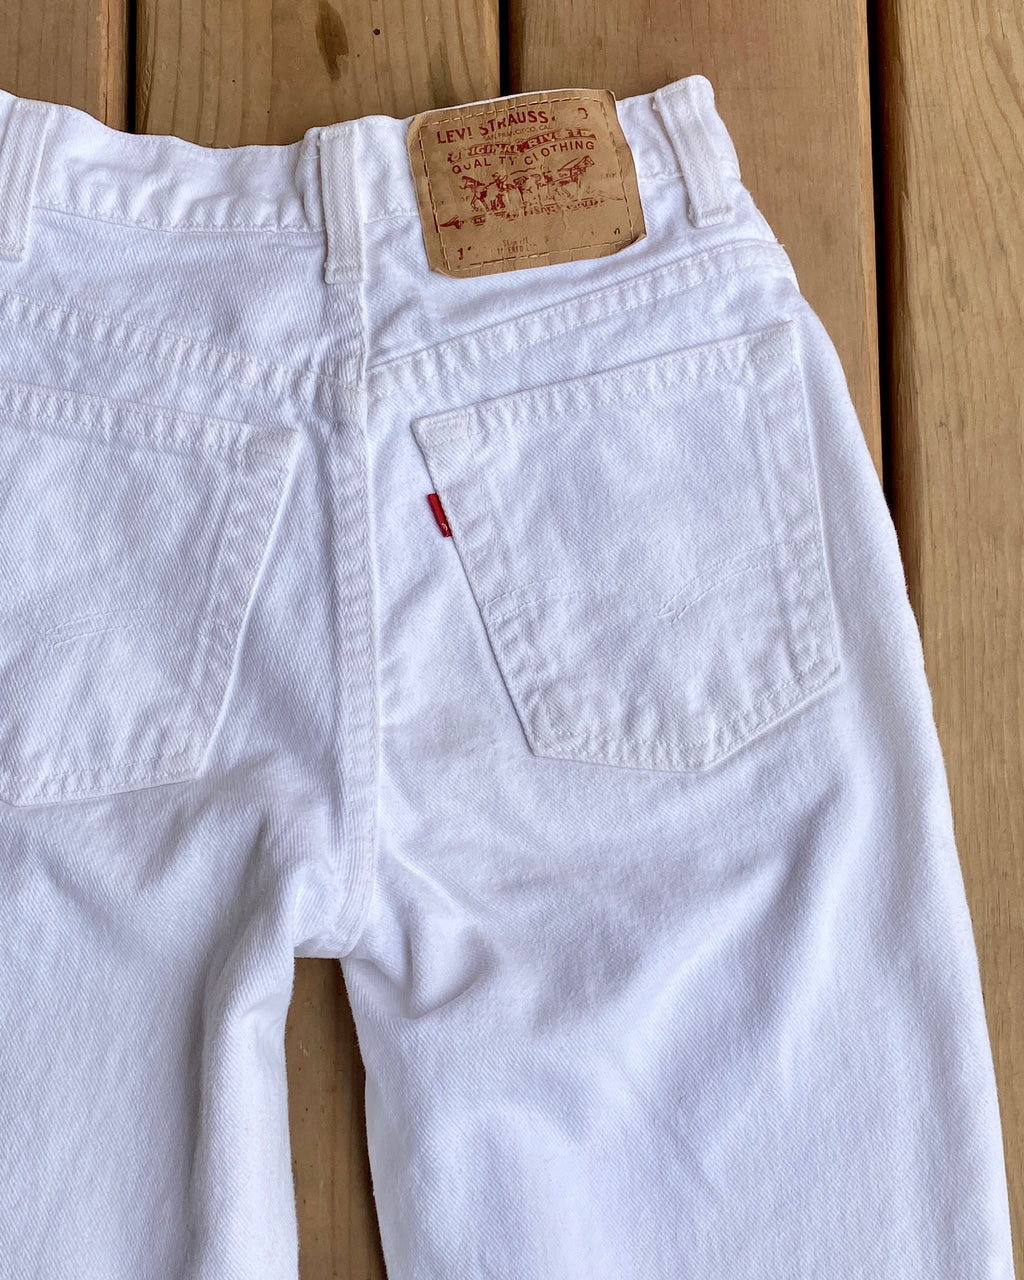 Vintage 1980s Levis 512 Red Tab White Jeans size 24 to 25 Waist Made in USA